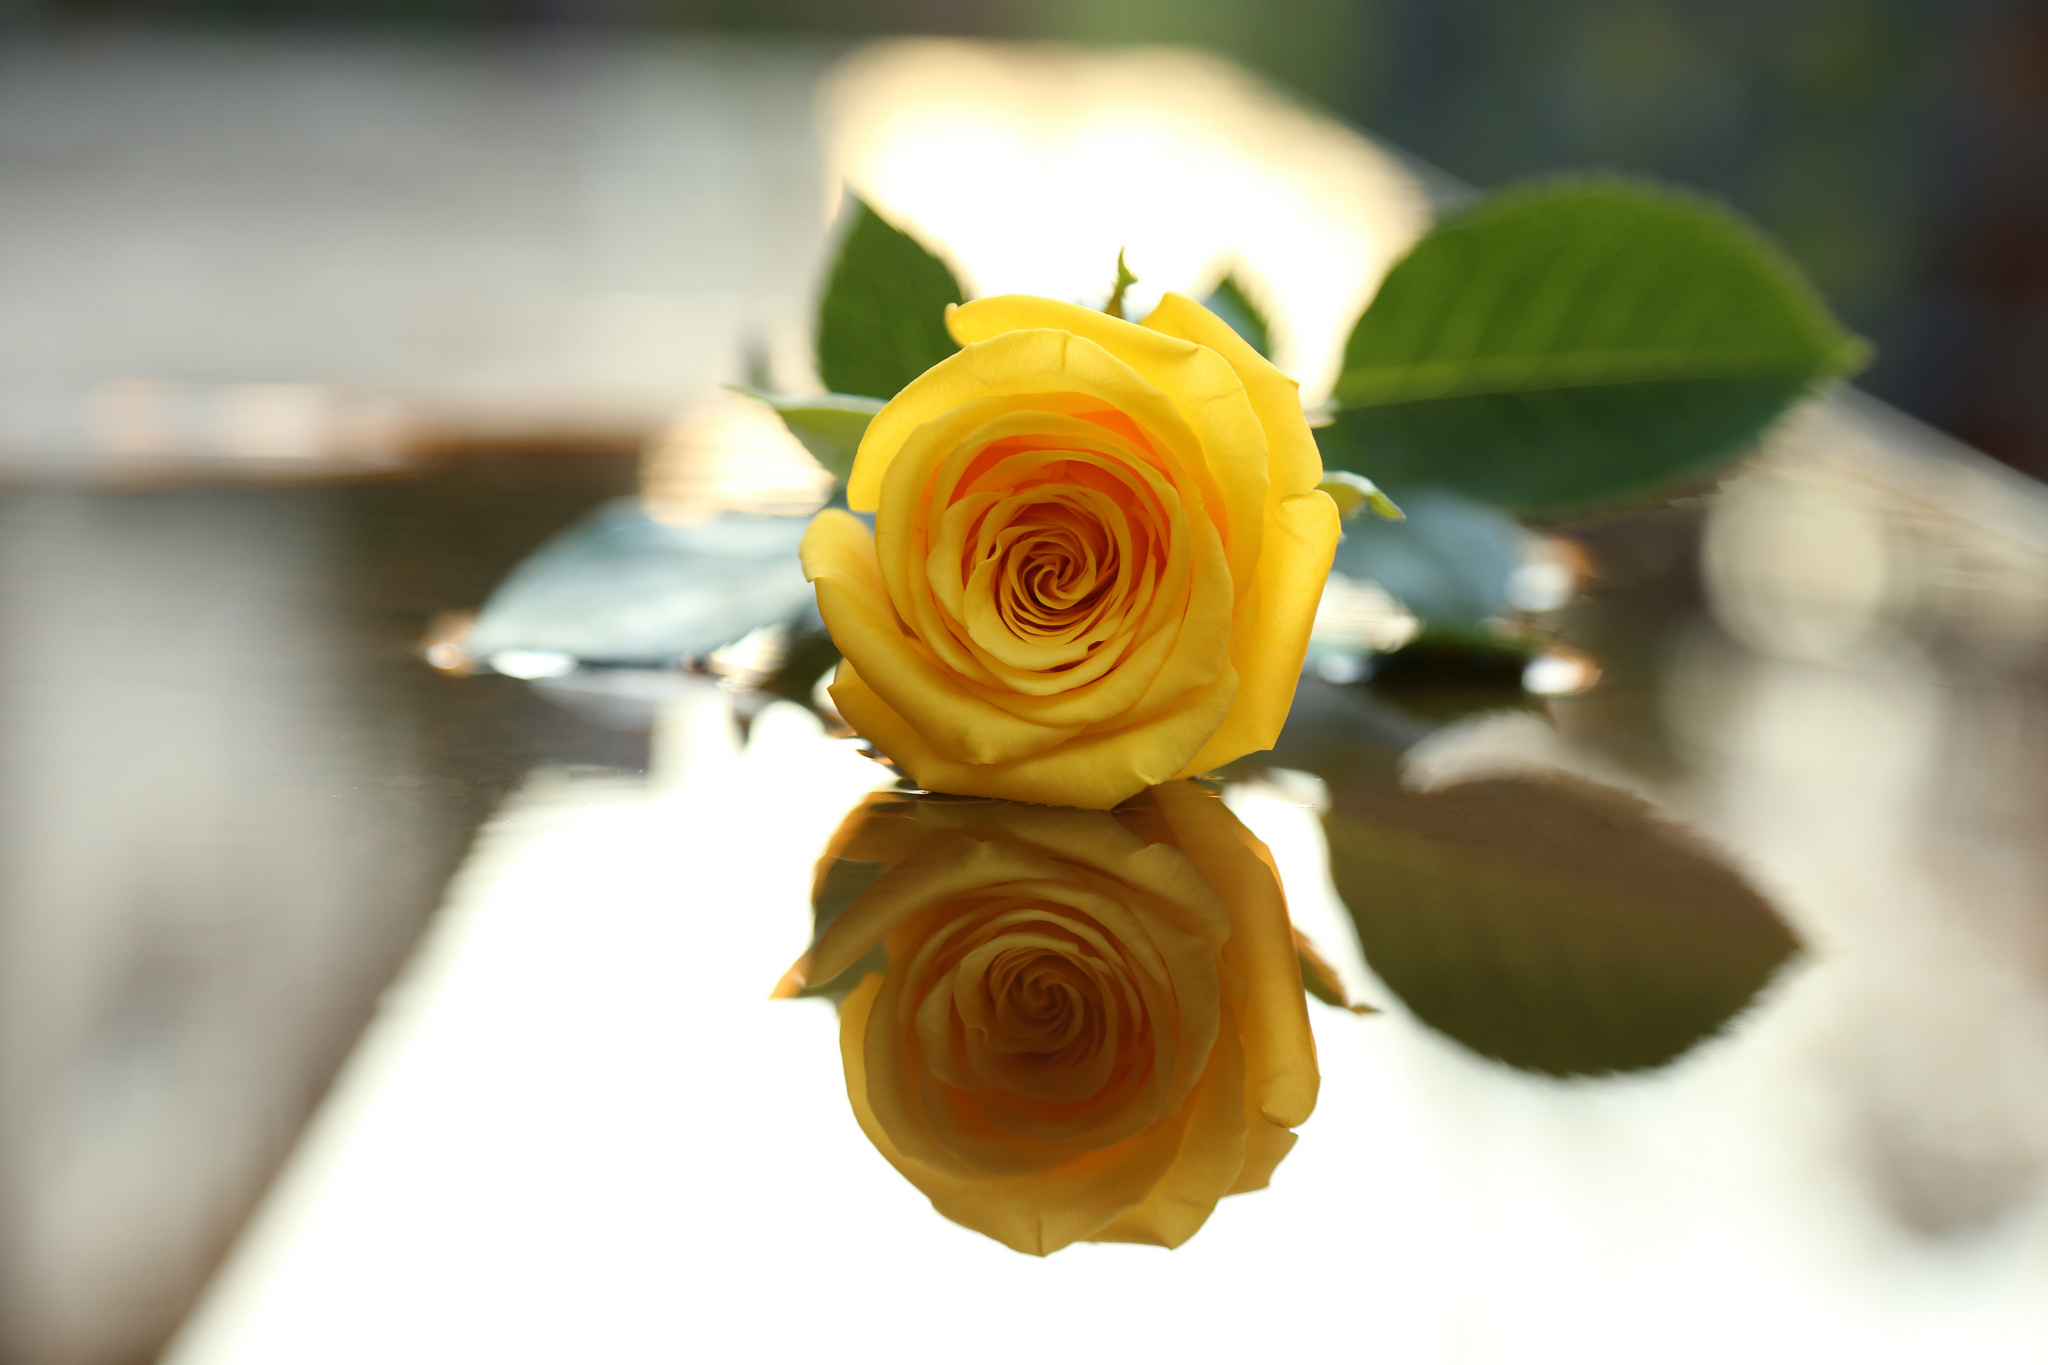 yellow flower, flowers, rose, leaf, flower, yellow rose, reflection, earth Full HD